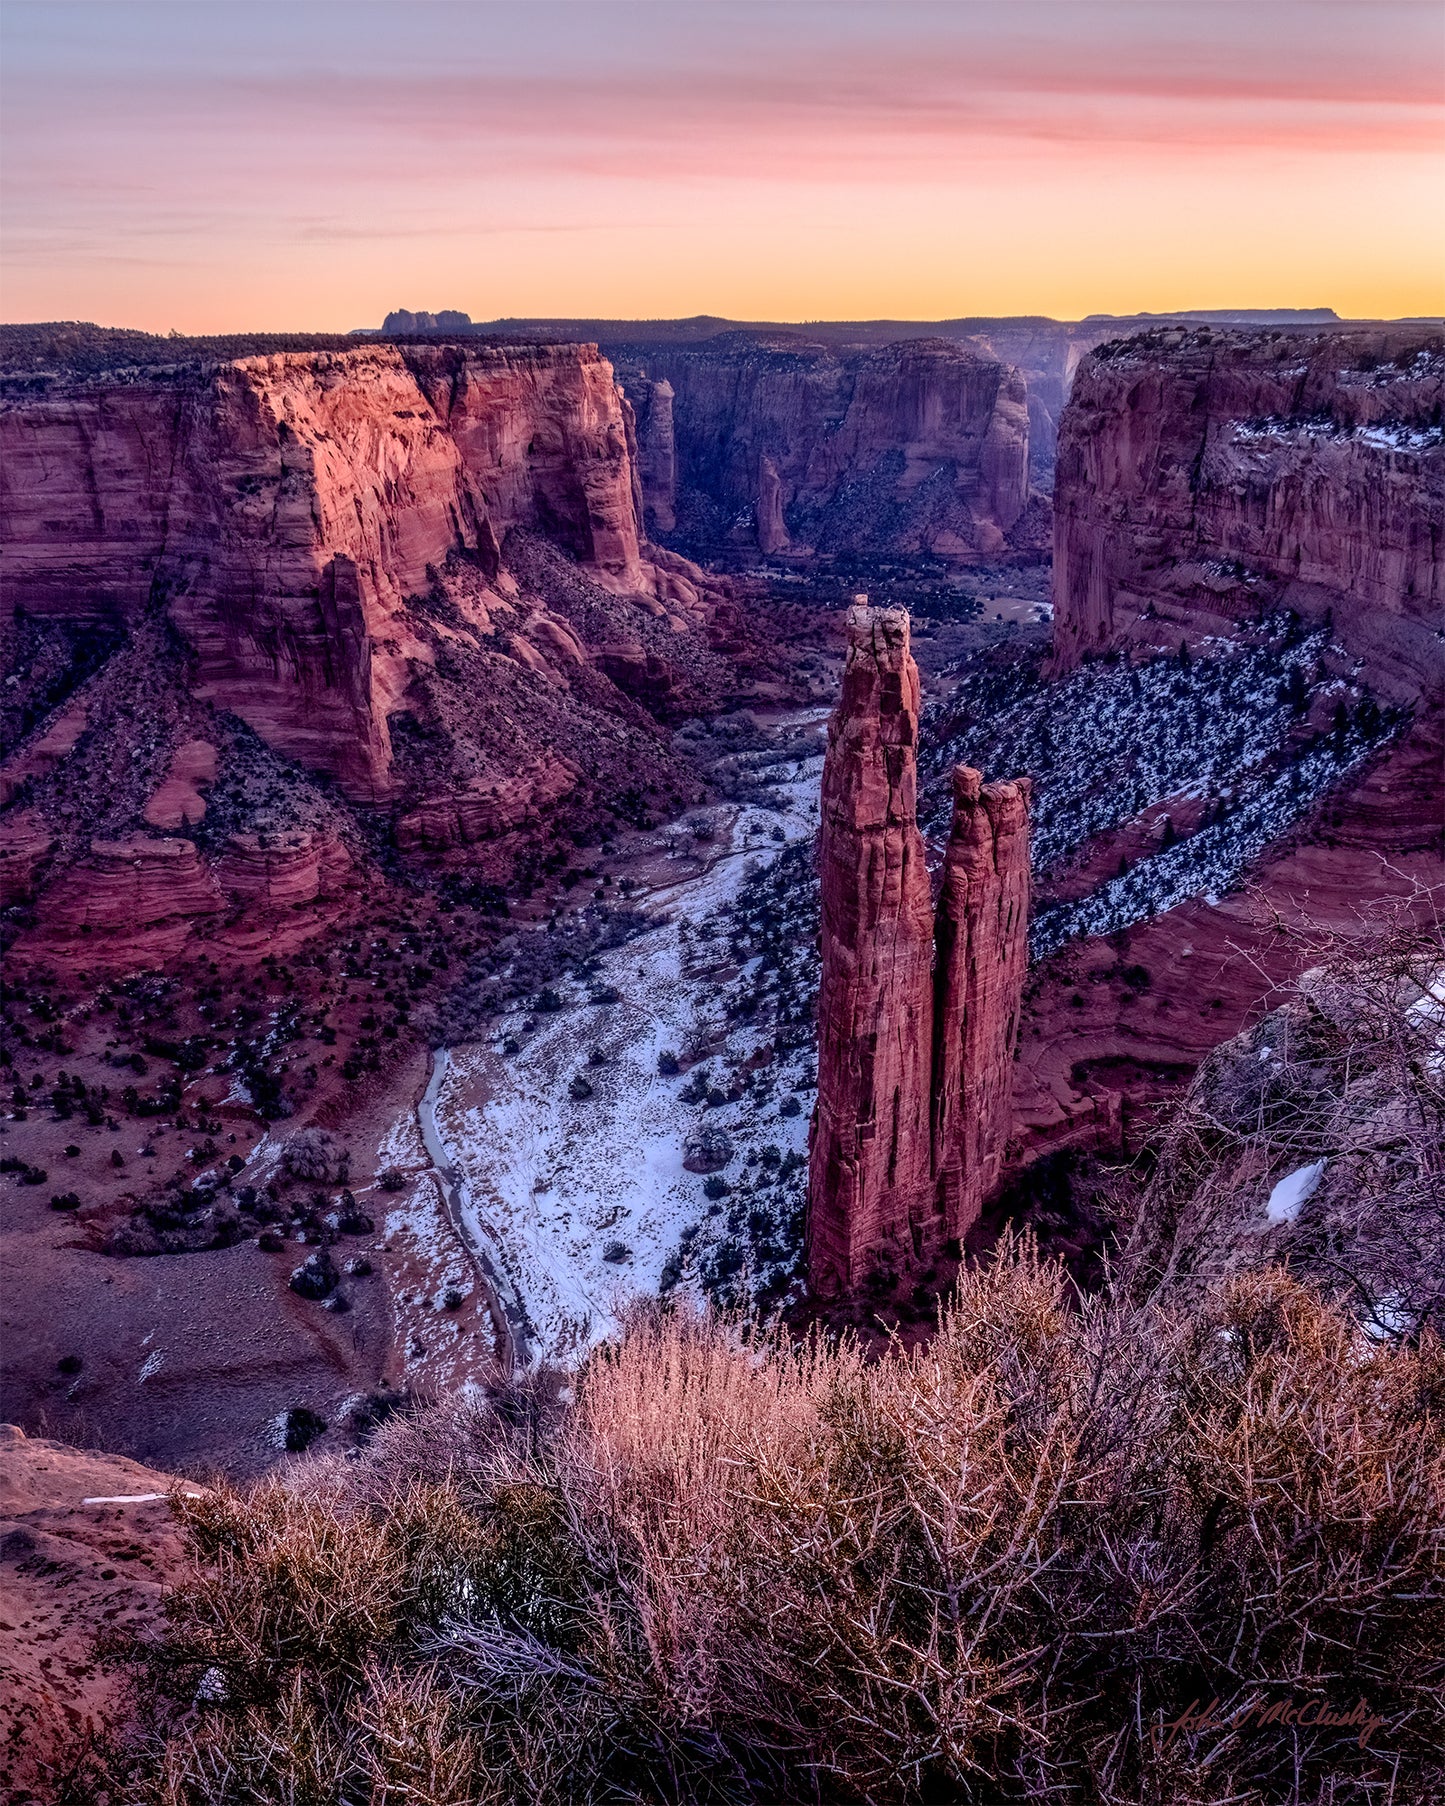 The pre-dawn glow lights the Canyon De Chelly.  Wispy pink clouds grace the sky and the gentle light highlights the rugged canyon walls and the dusting of snow on the canyon floor.